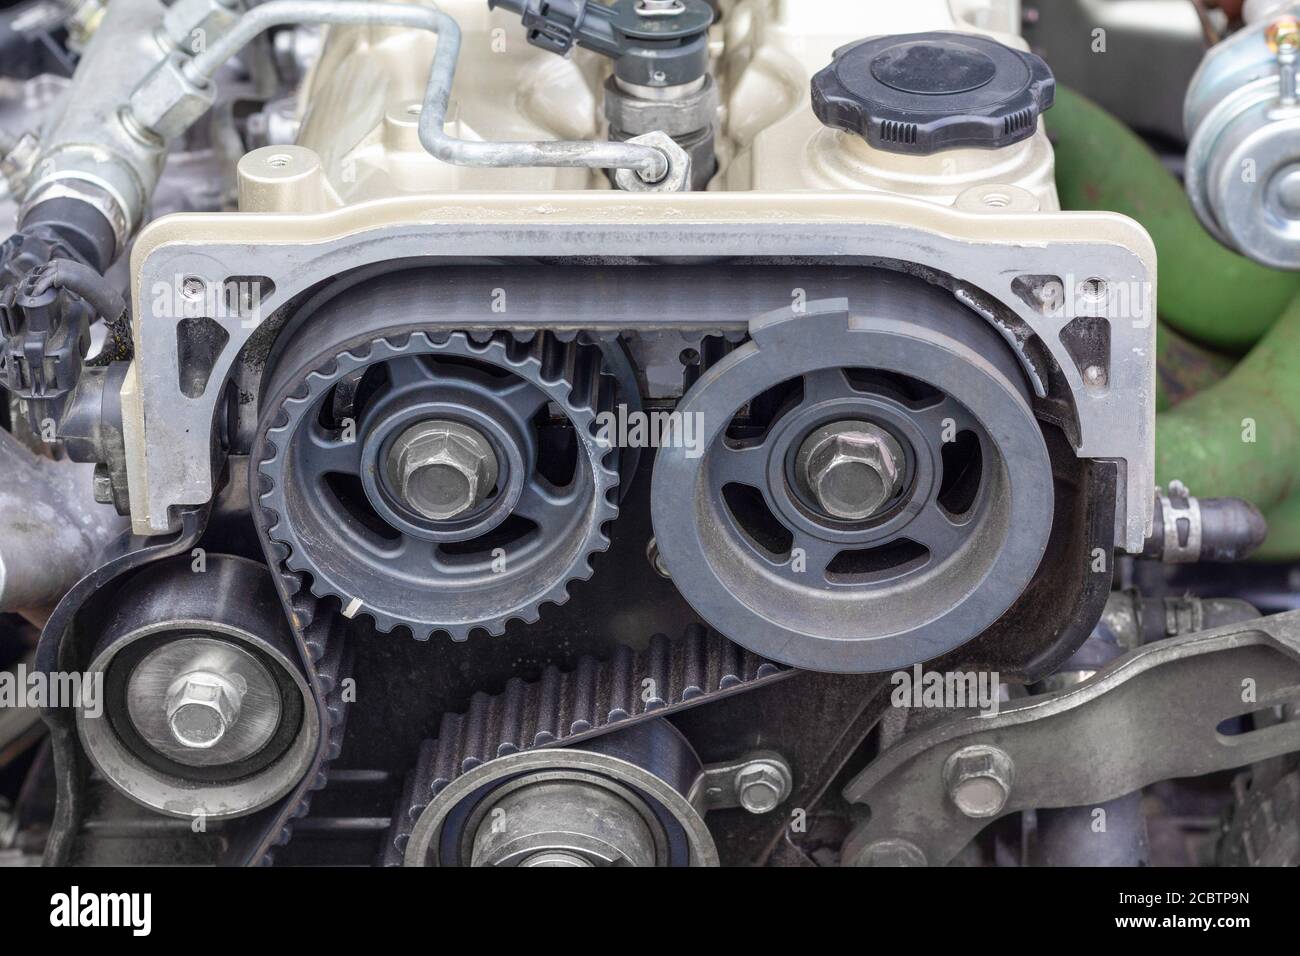 Timing belt and twin camshaft sprocket in engine racing car. Stock Photo